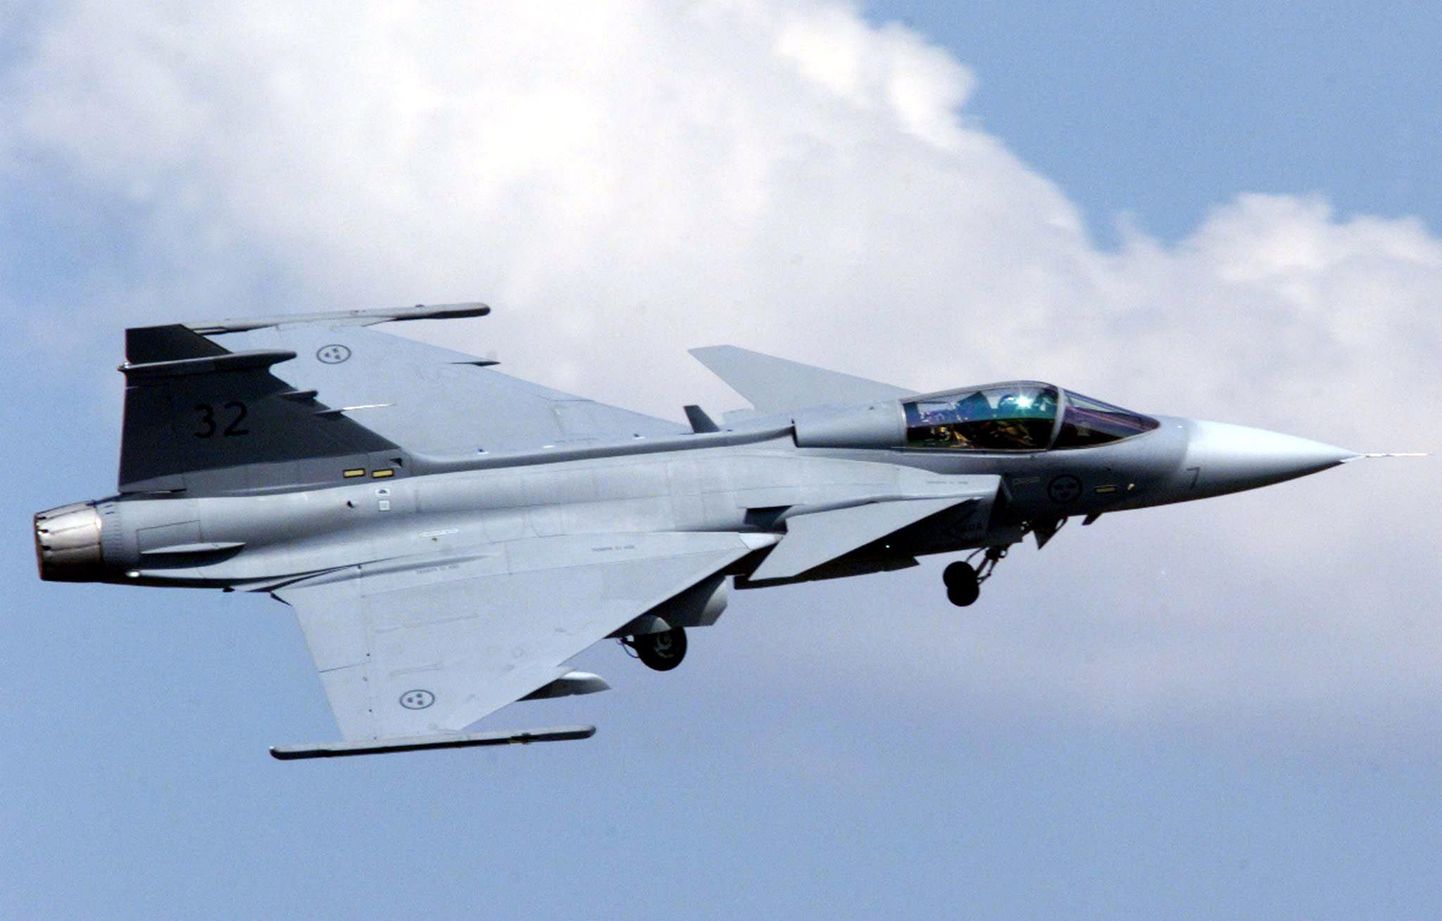 File picture shows a Swedish air force Saab Gripen multi task fighter plane performing over the Waterkloof airforce base in South Africa, November 1, 1998. Switzerland has chosen to replace its fighter jet fleet with Swedish defence and aerospace group Saab's JAS-39 Gripen, Swiss Defence Minister Ueli Maurer announced November 30, 2011. REUTERS/Peter Andrews/File  (SOUTH AFRICA  - Tags: POLITICS MILITARY BUSINESS)